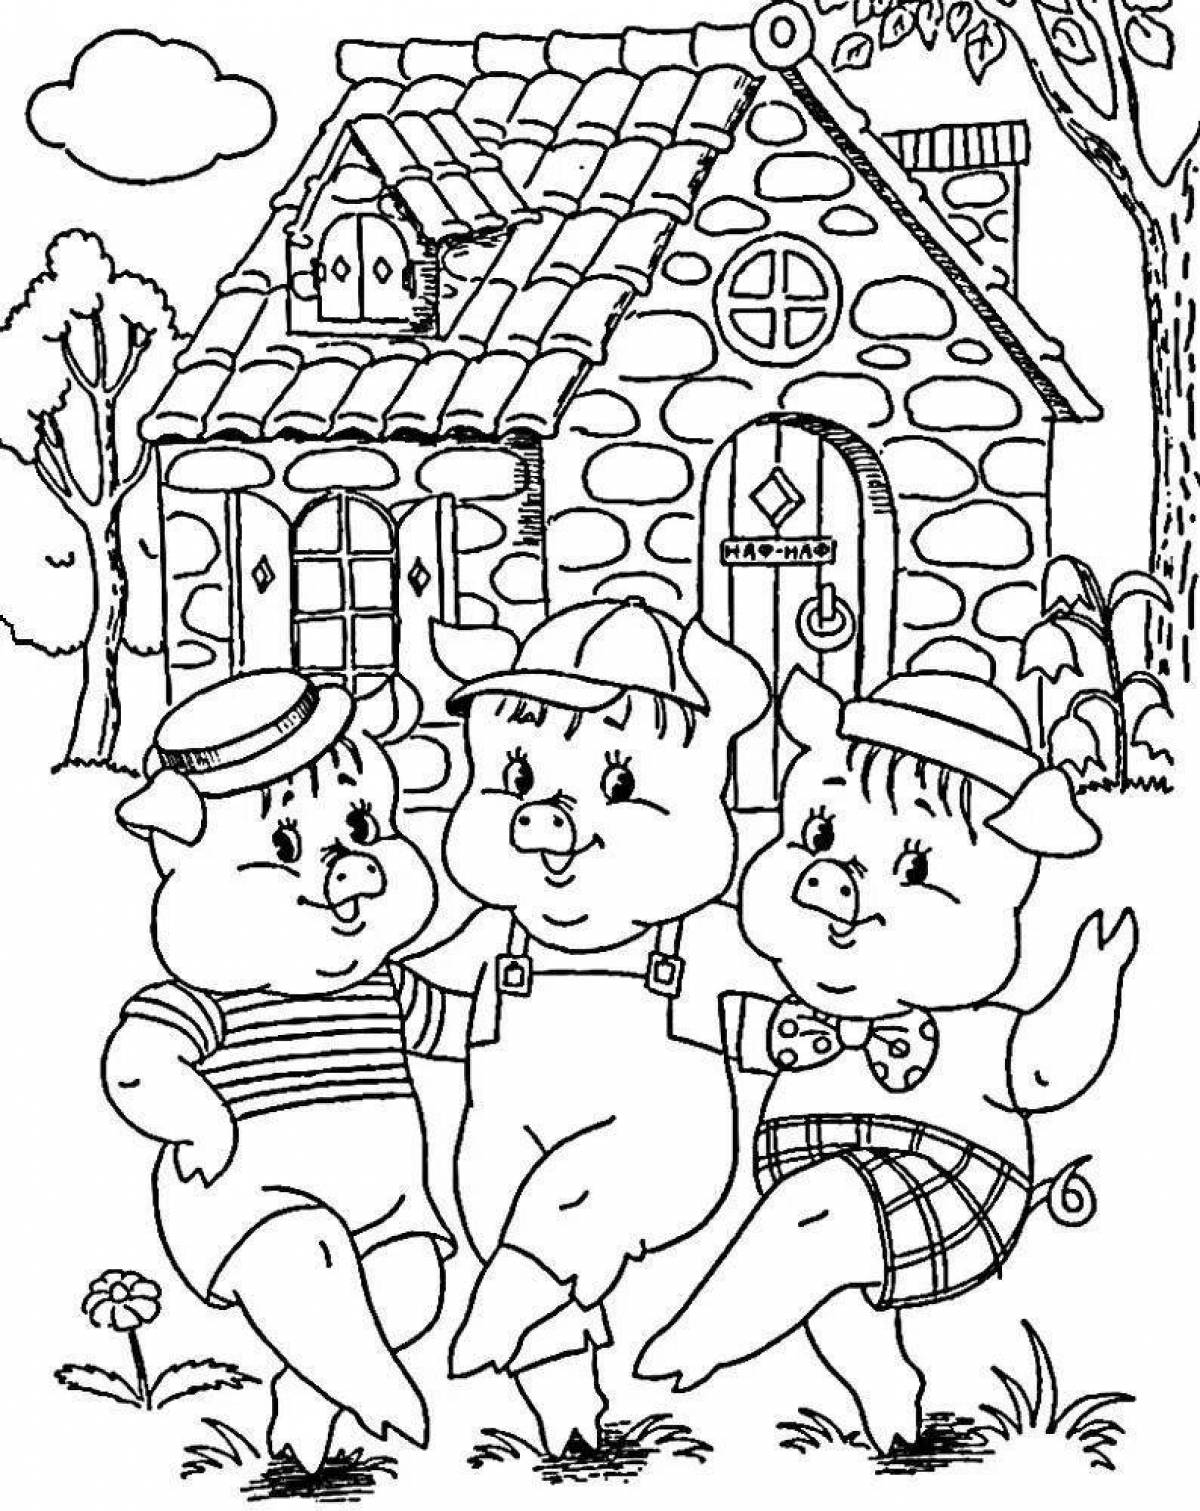 Animated coloring book for preschoolers